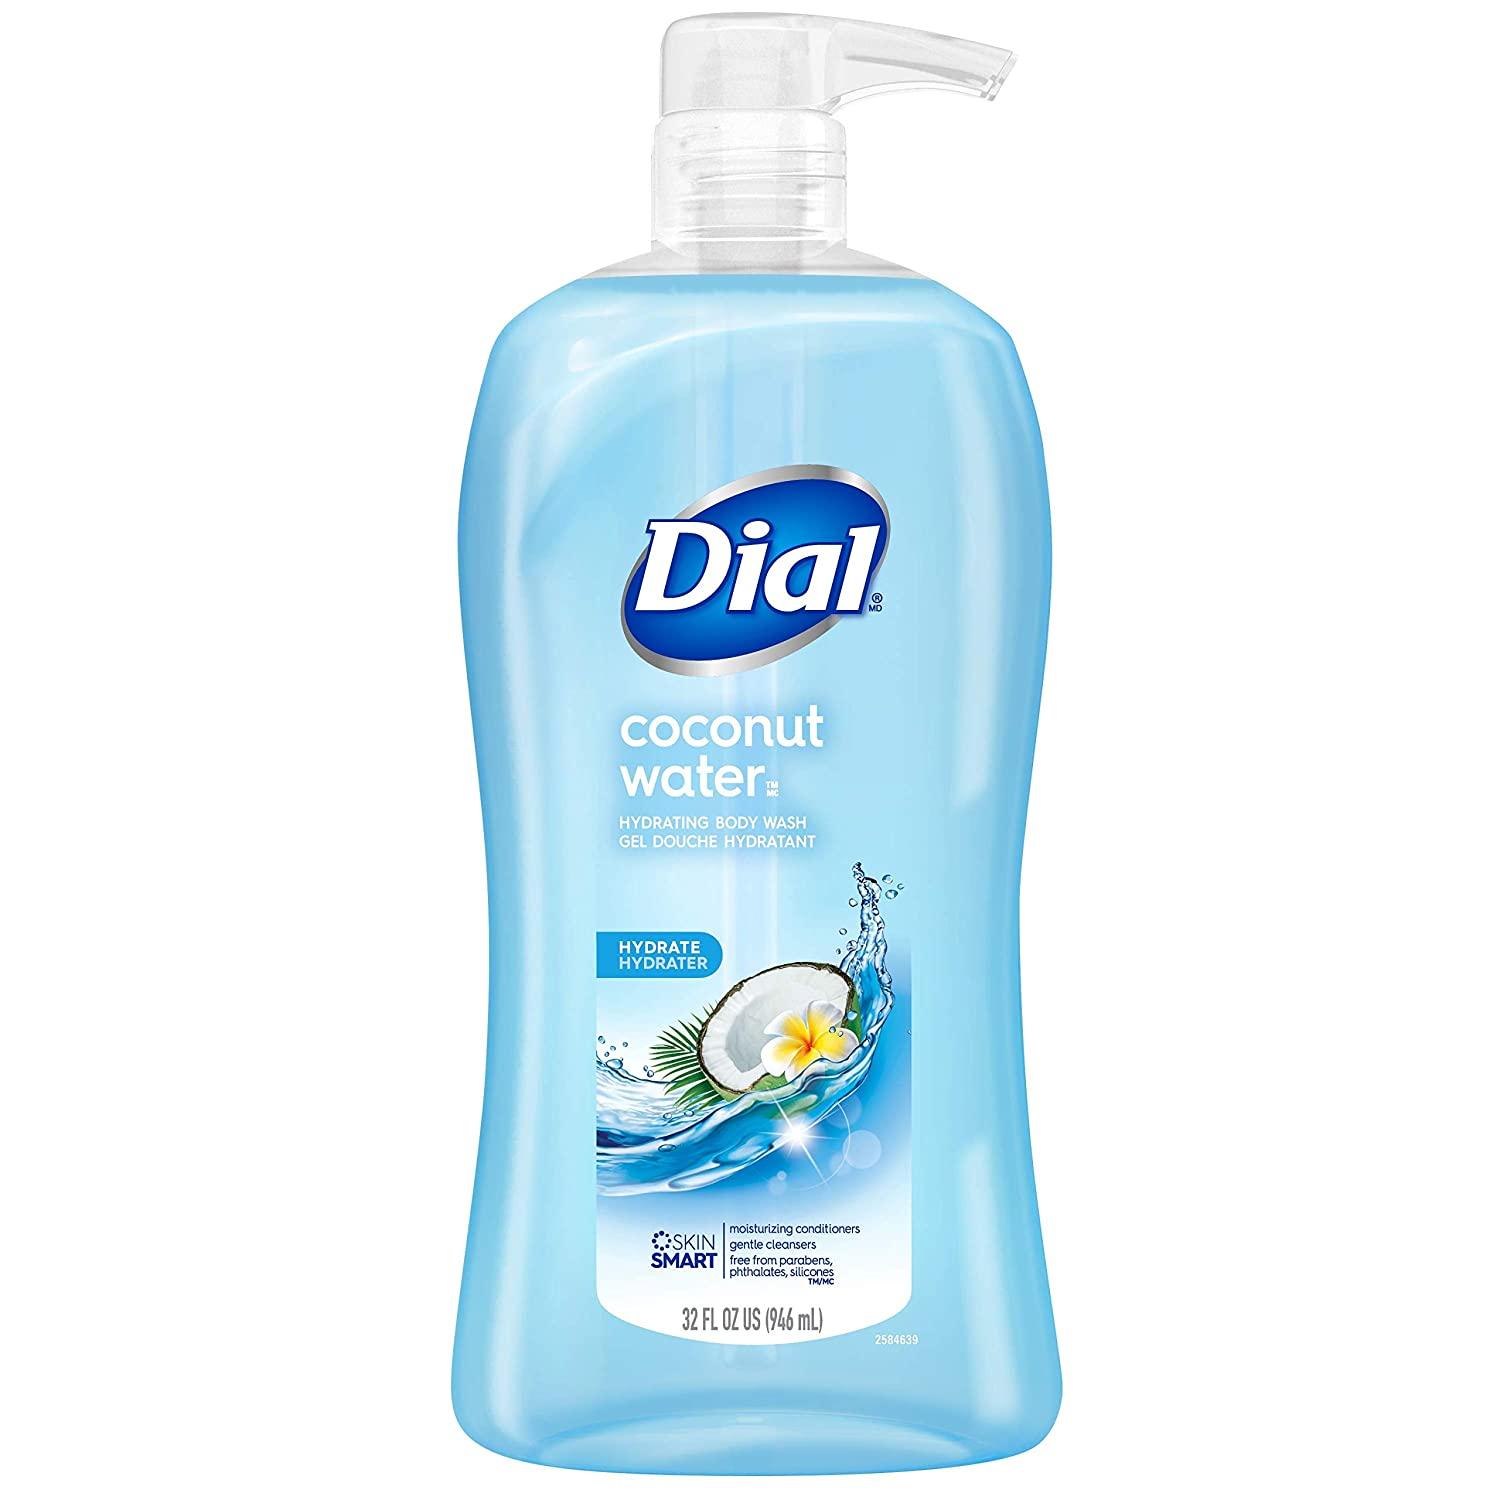 3 Dial Body Wash for $11.79